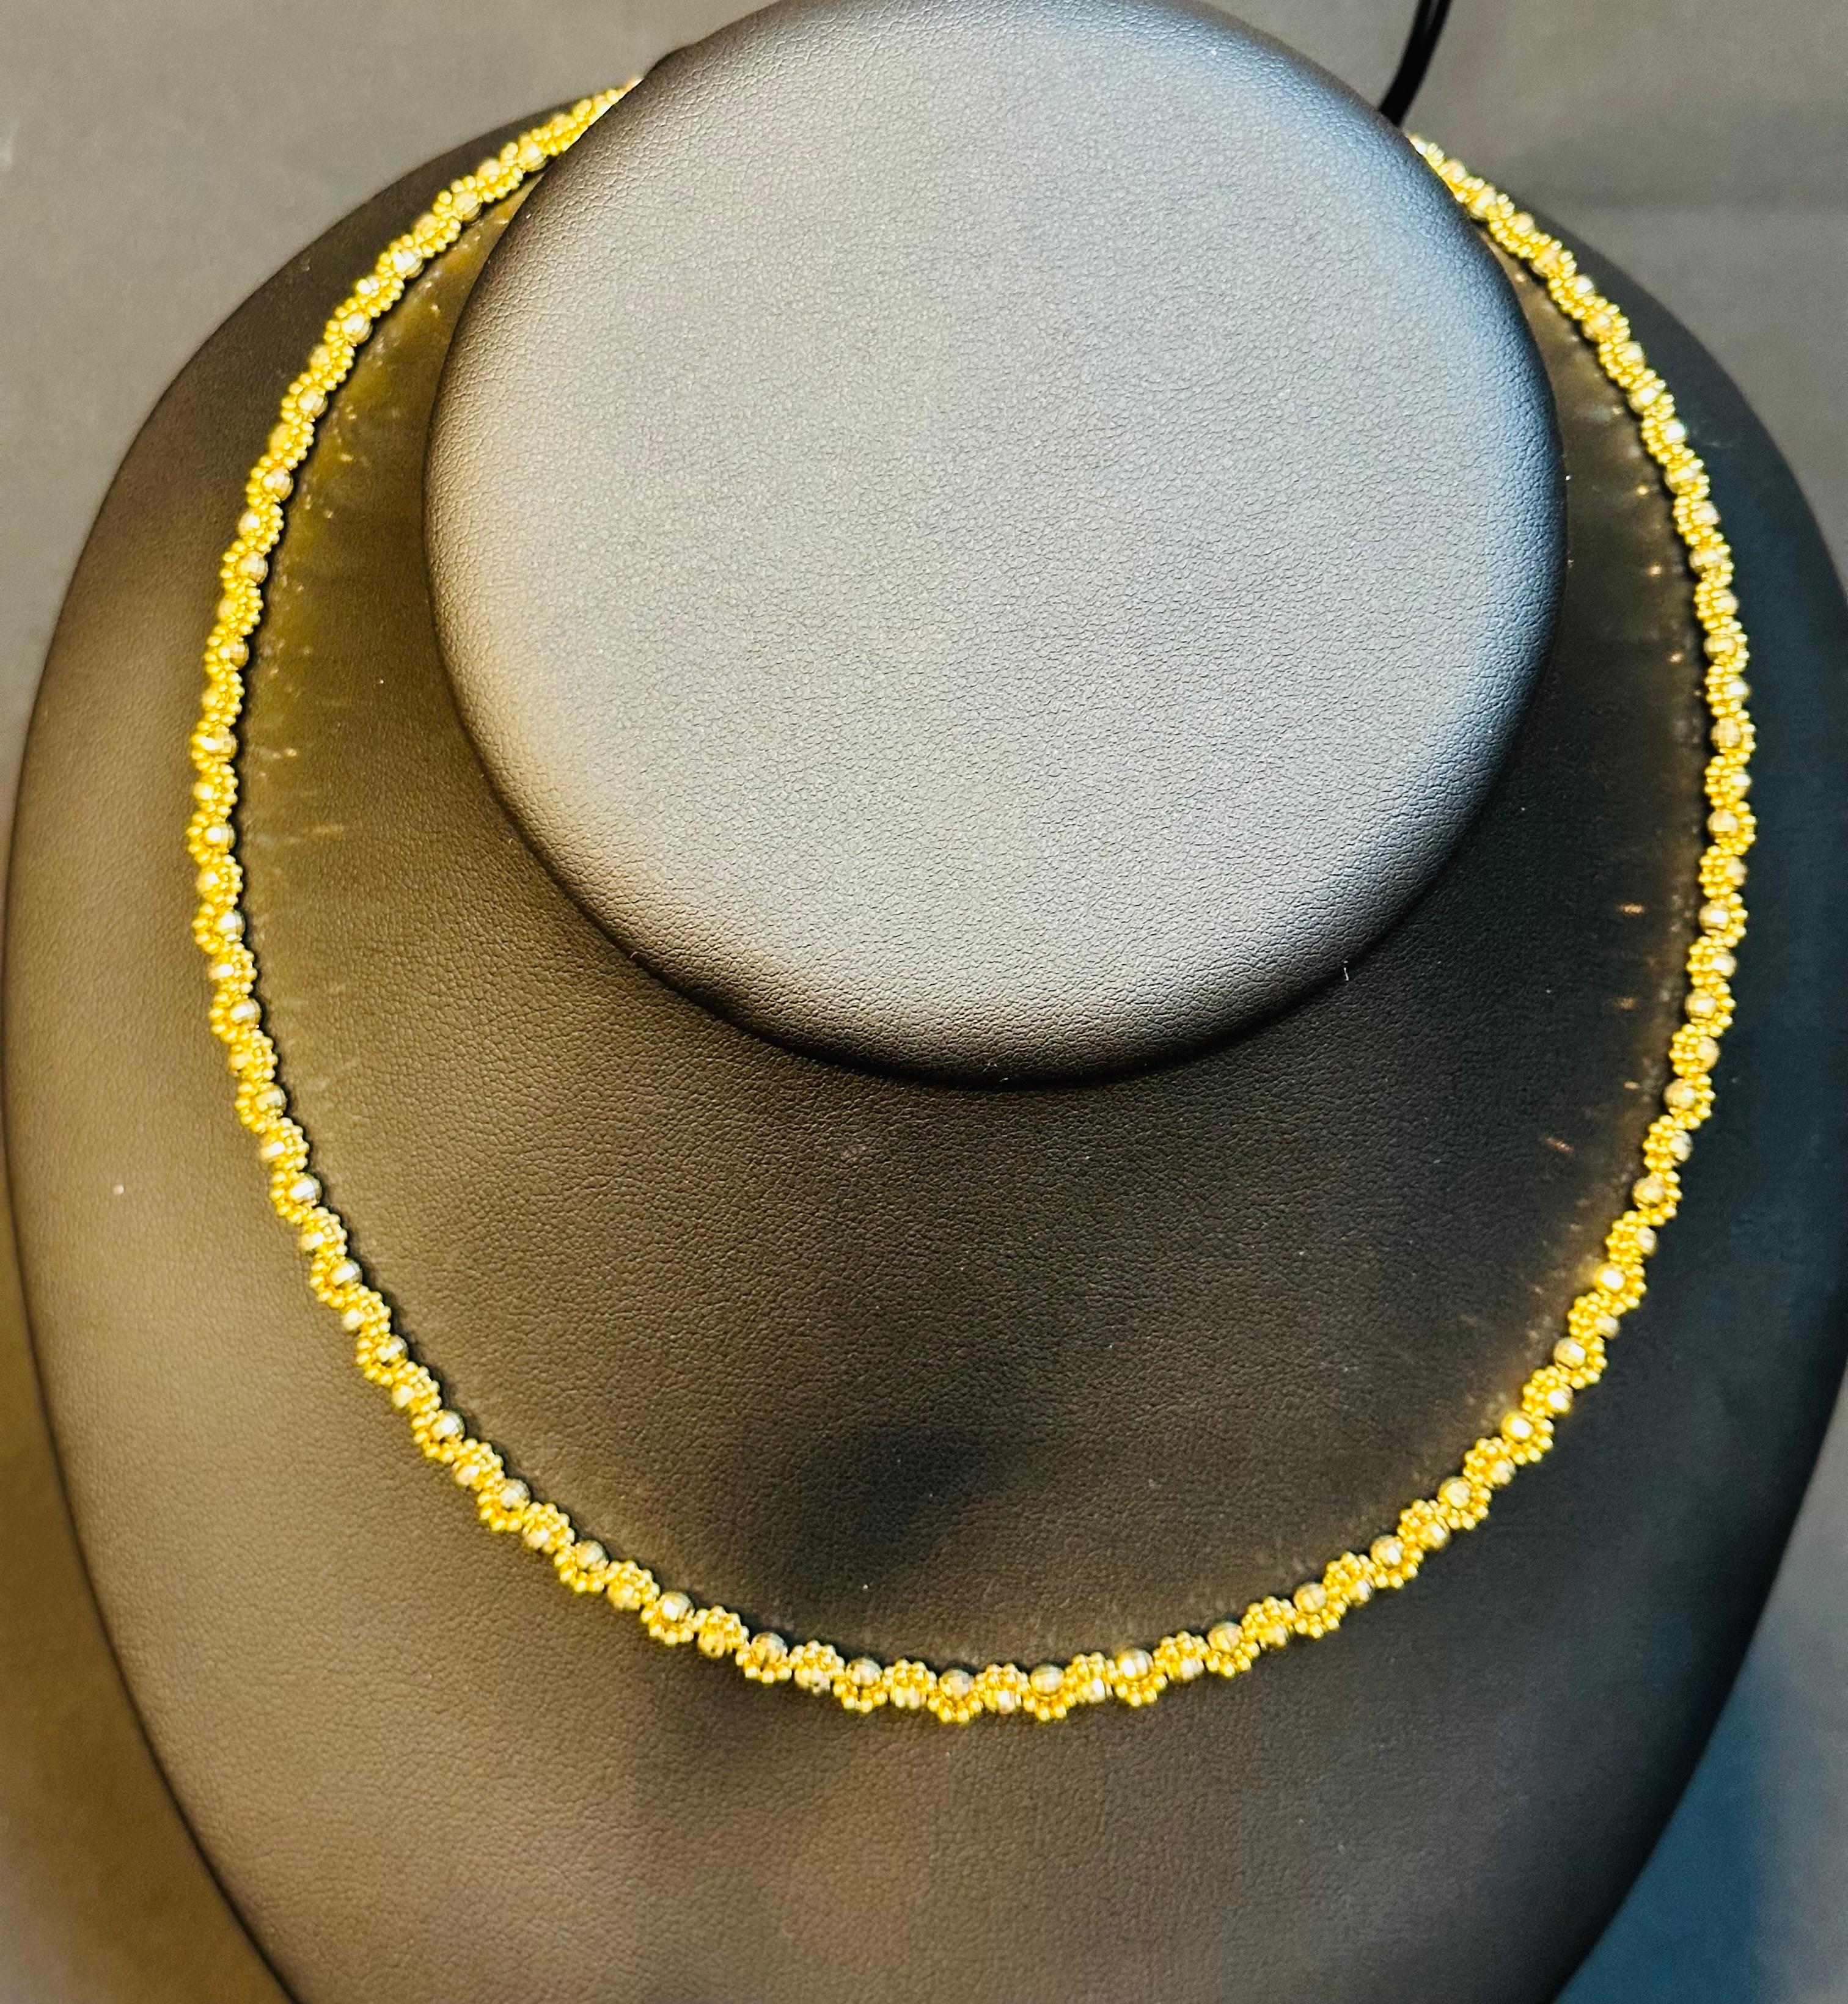 Vintage 14 Karat Yellow Gold 13 Gm, Twisted Chains with Balls in Between For Sale 1